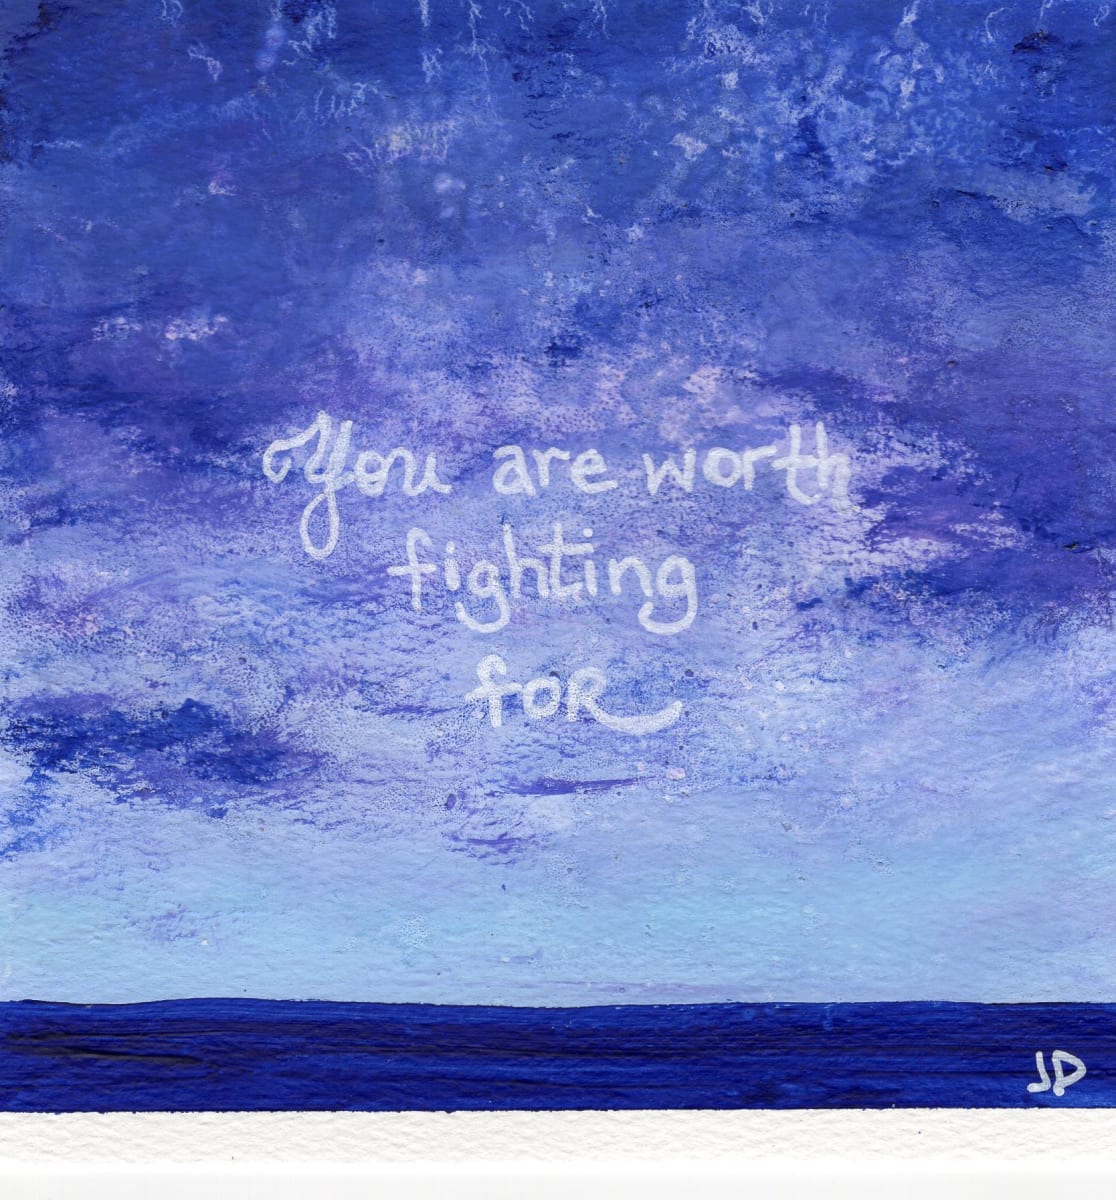 You are worth fighting for by Jenny E. Dennis 